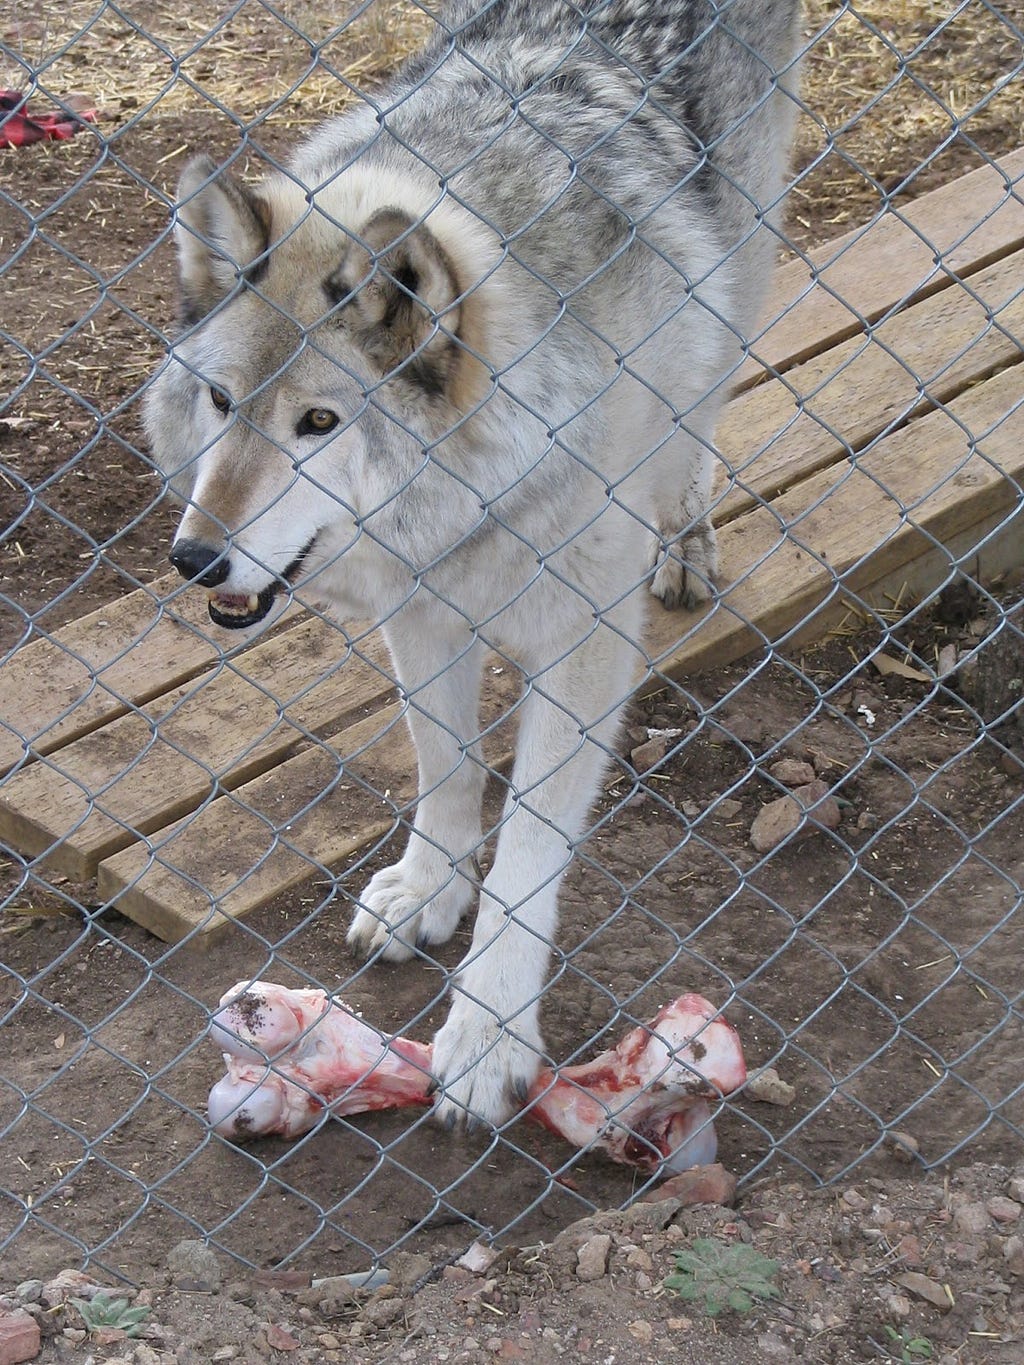 Cheyenne the grey and white wolf is standing with one paw on a bloody bone.